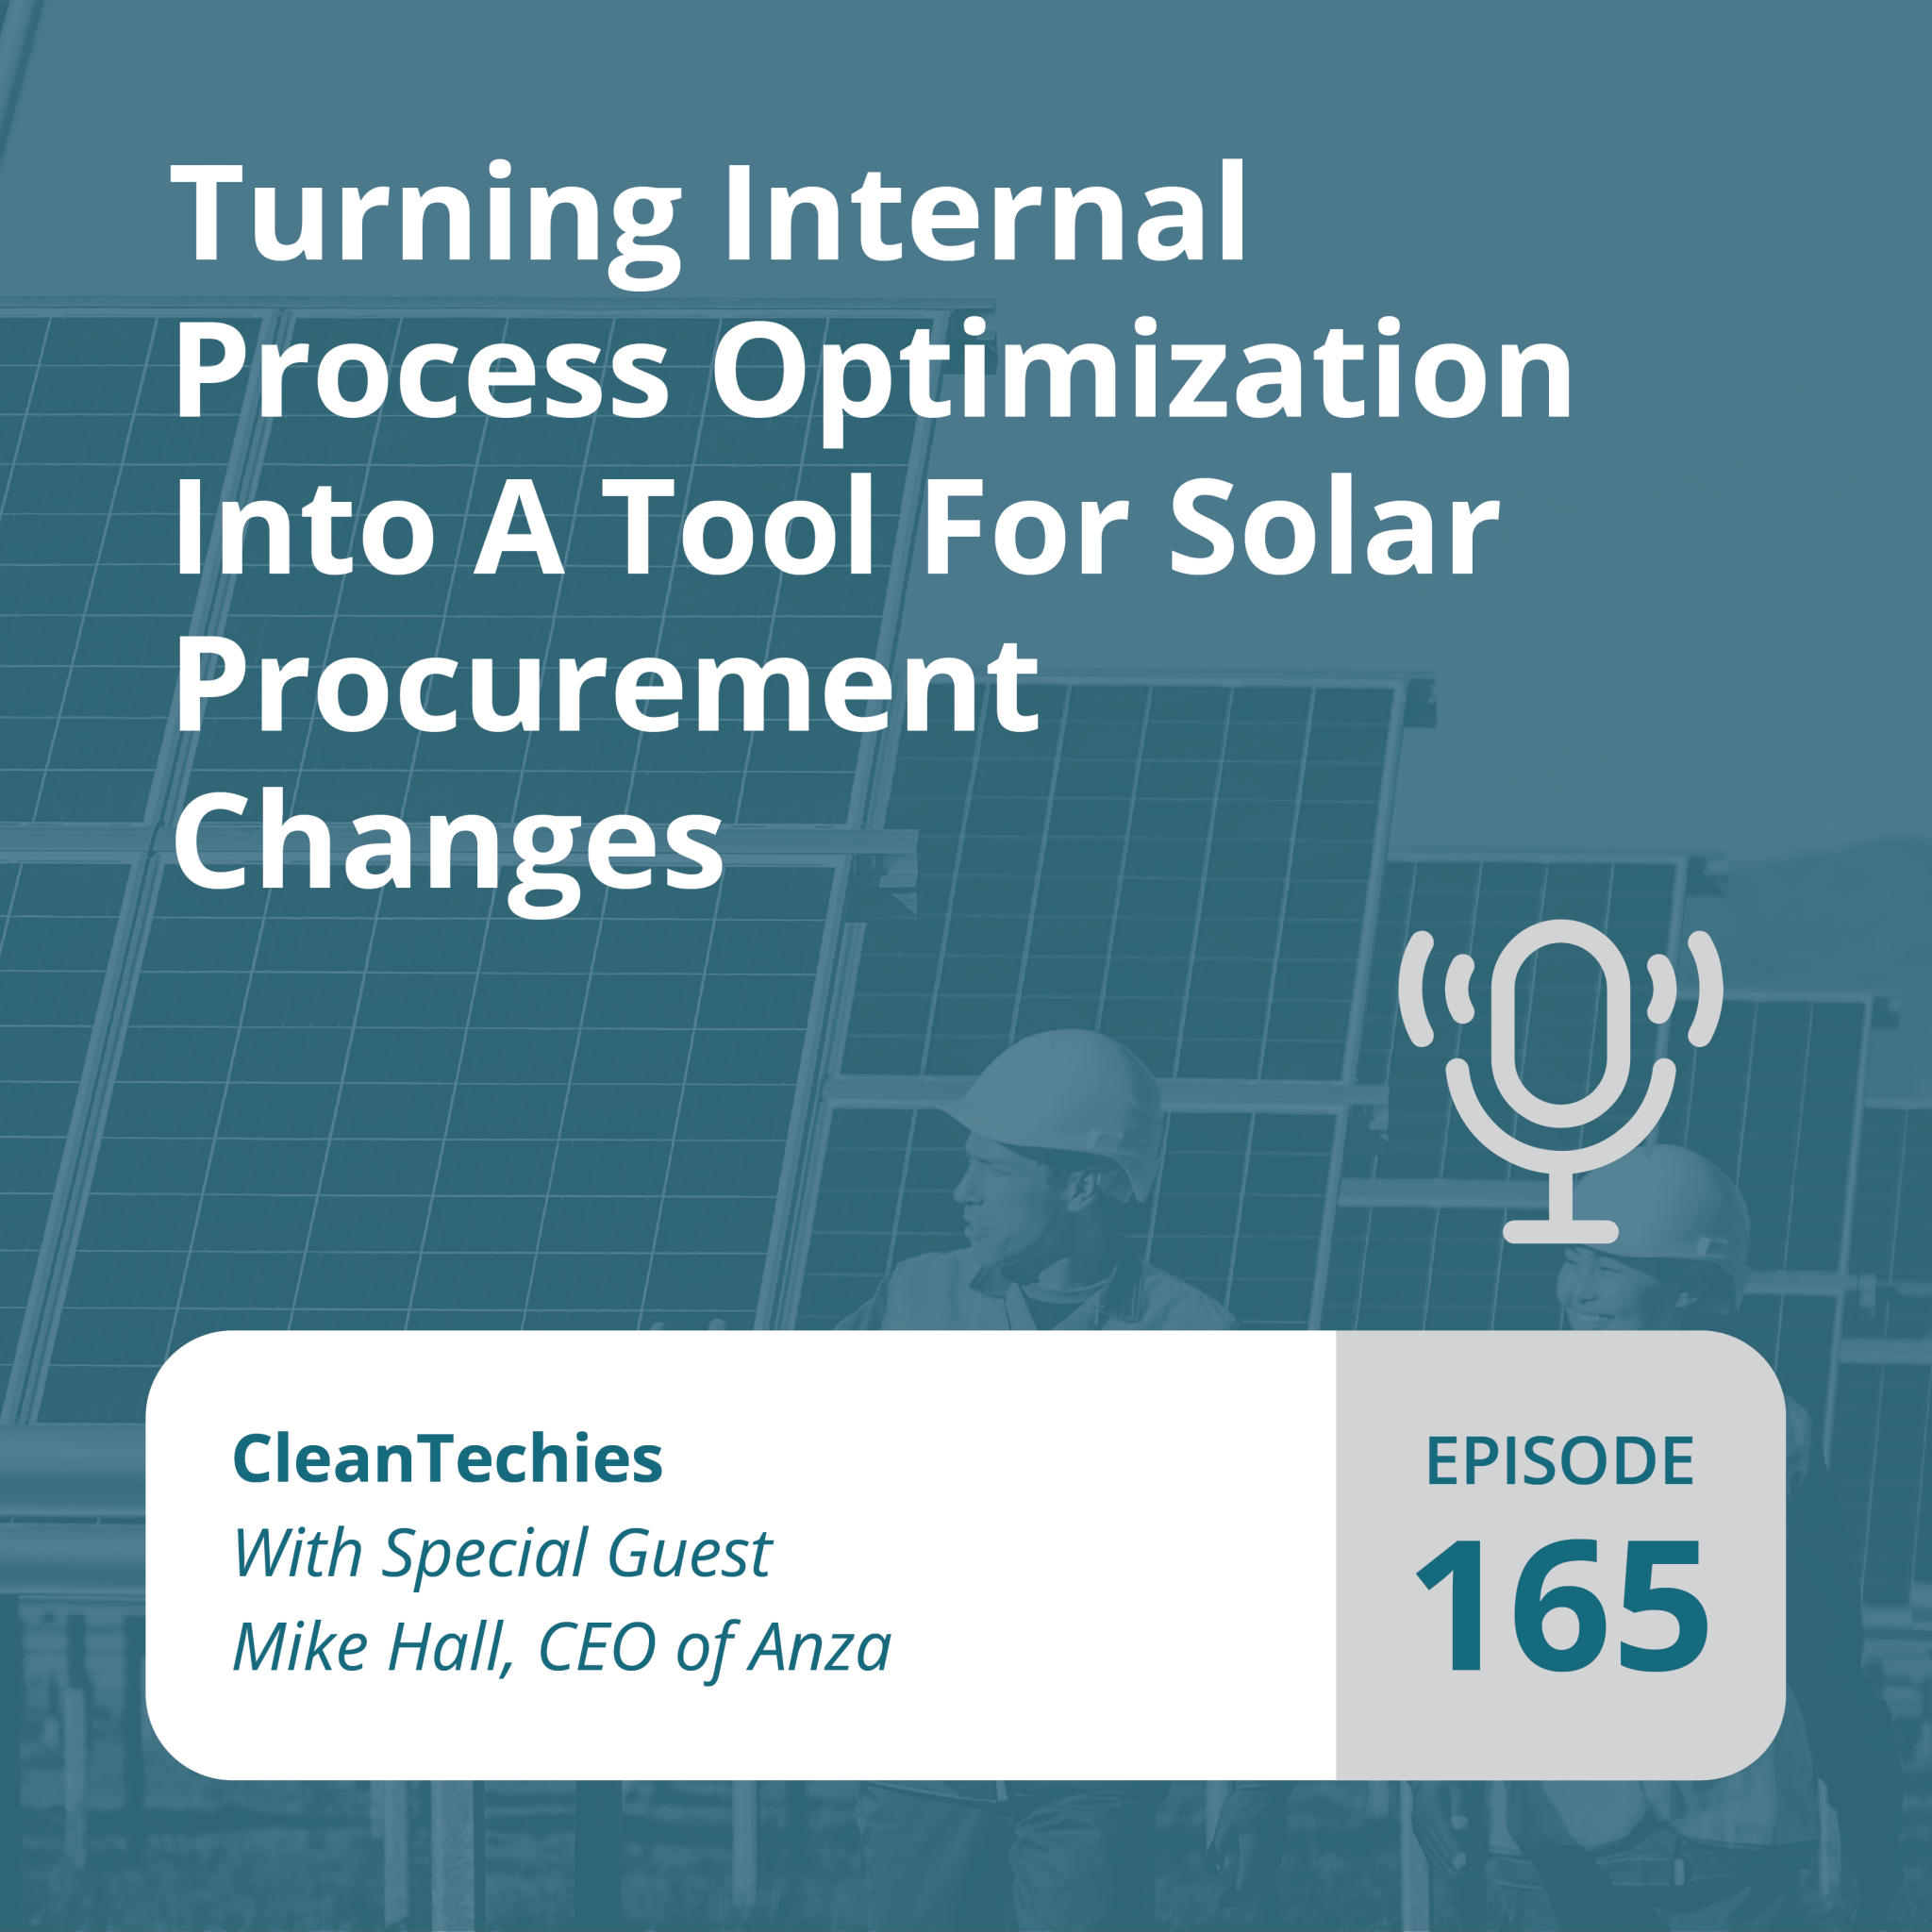 Mike Hall on CleanTechies: Turning Internal Process Optimization Into A Tool for Solar Procurement Challenges